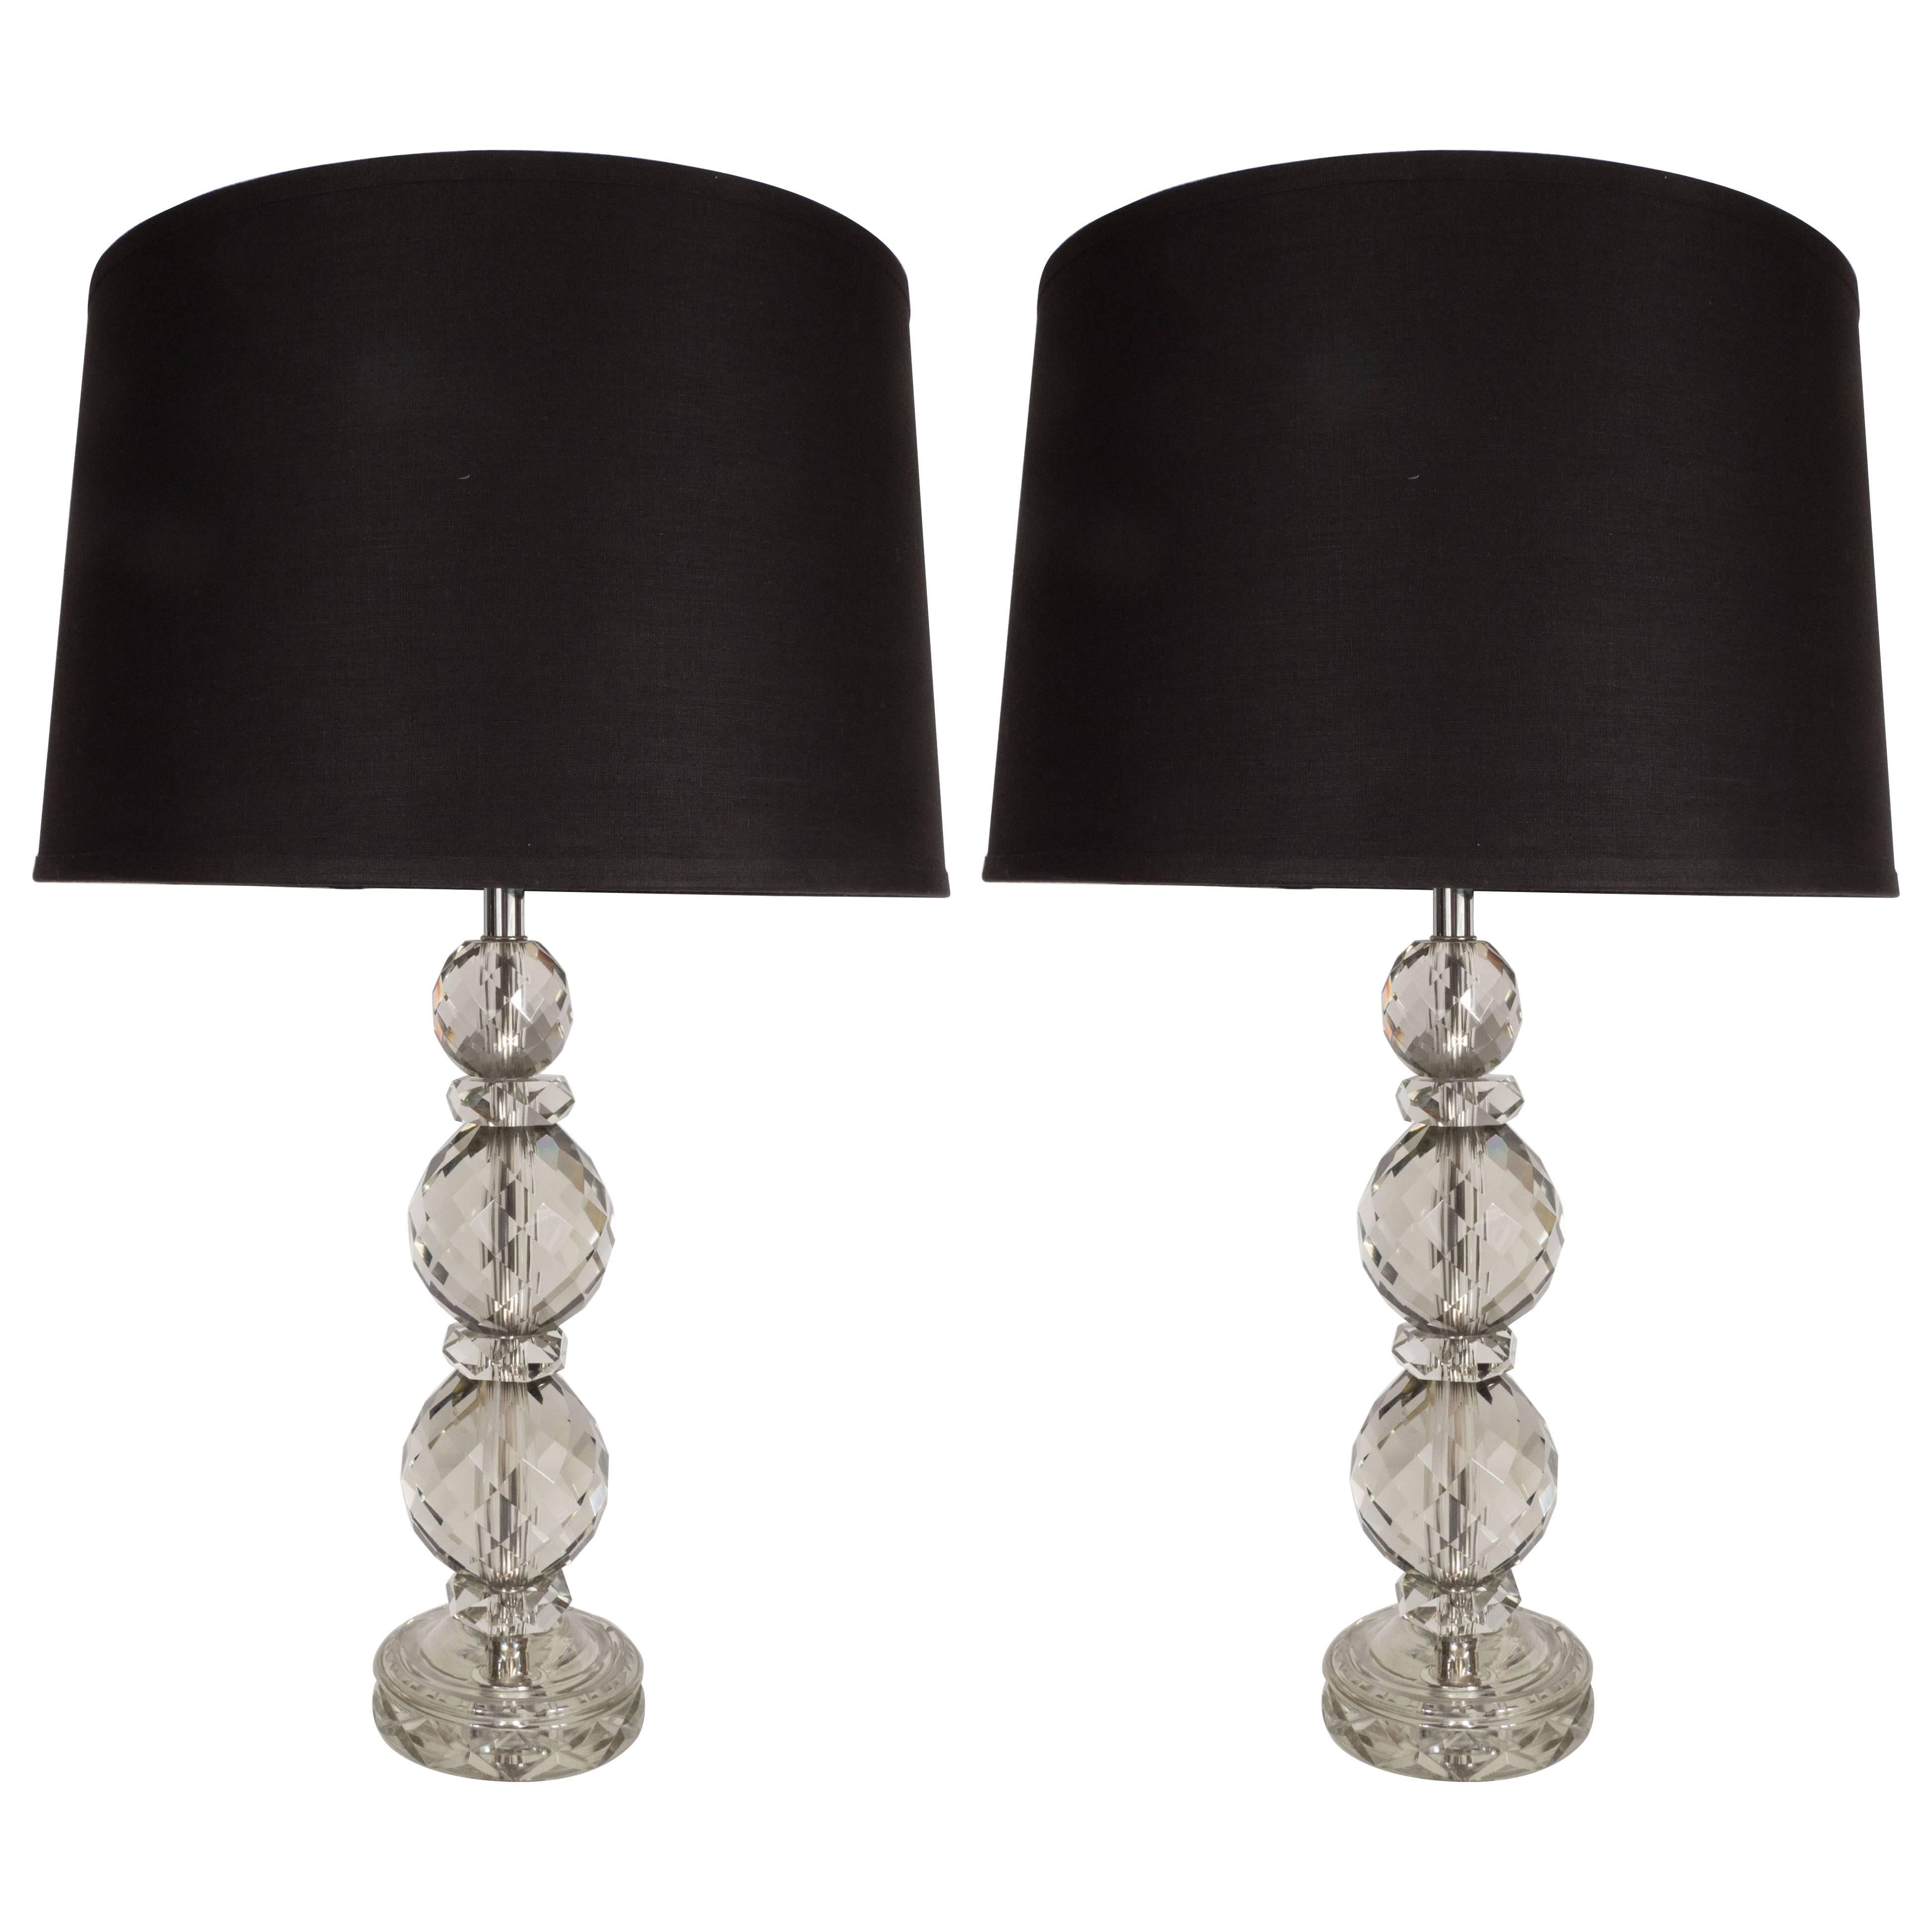 Pair of Elegant 1940s Hollywood Smoked Cut and Beveled Crystal Table Lamps